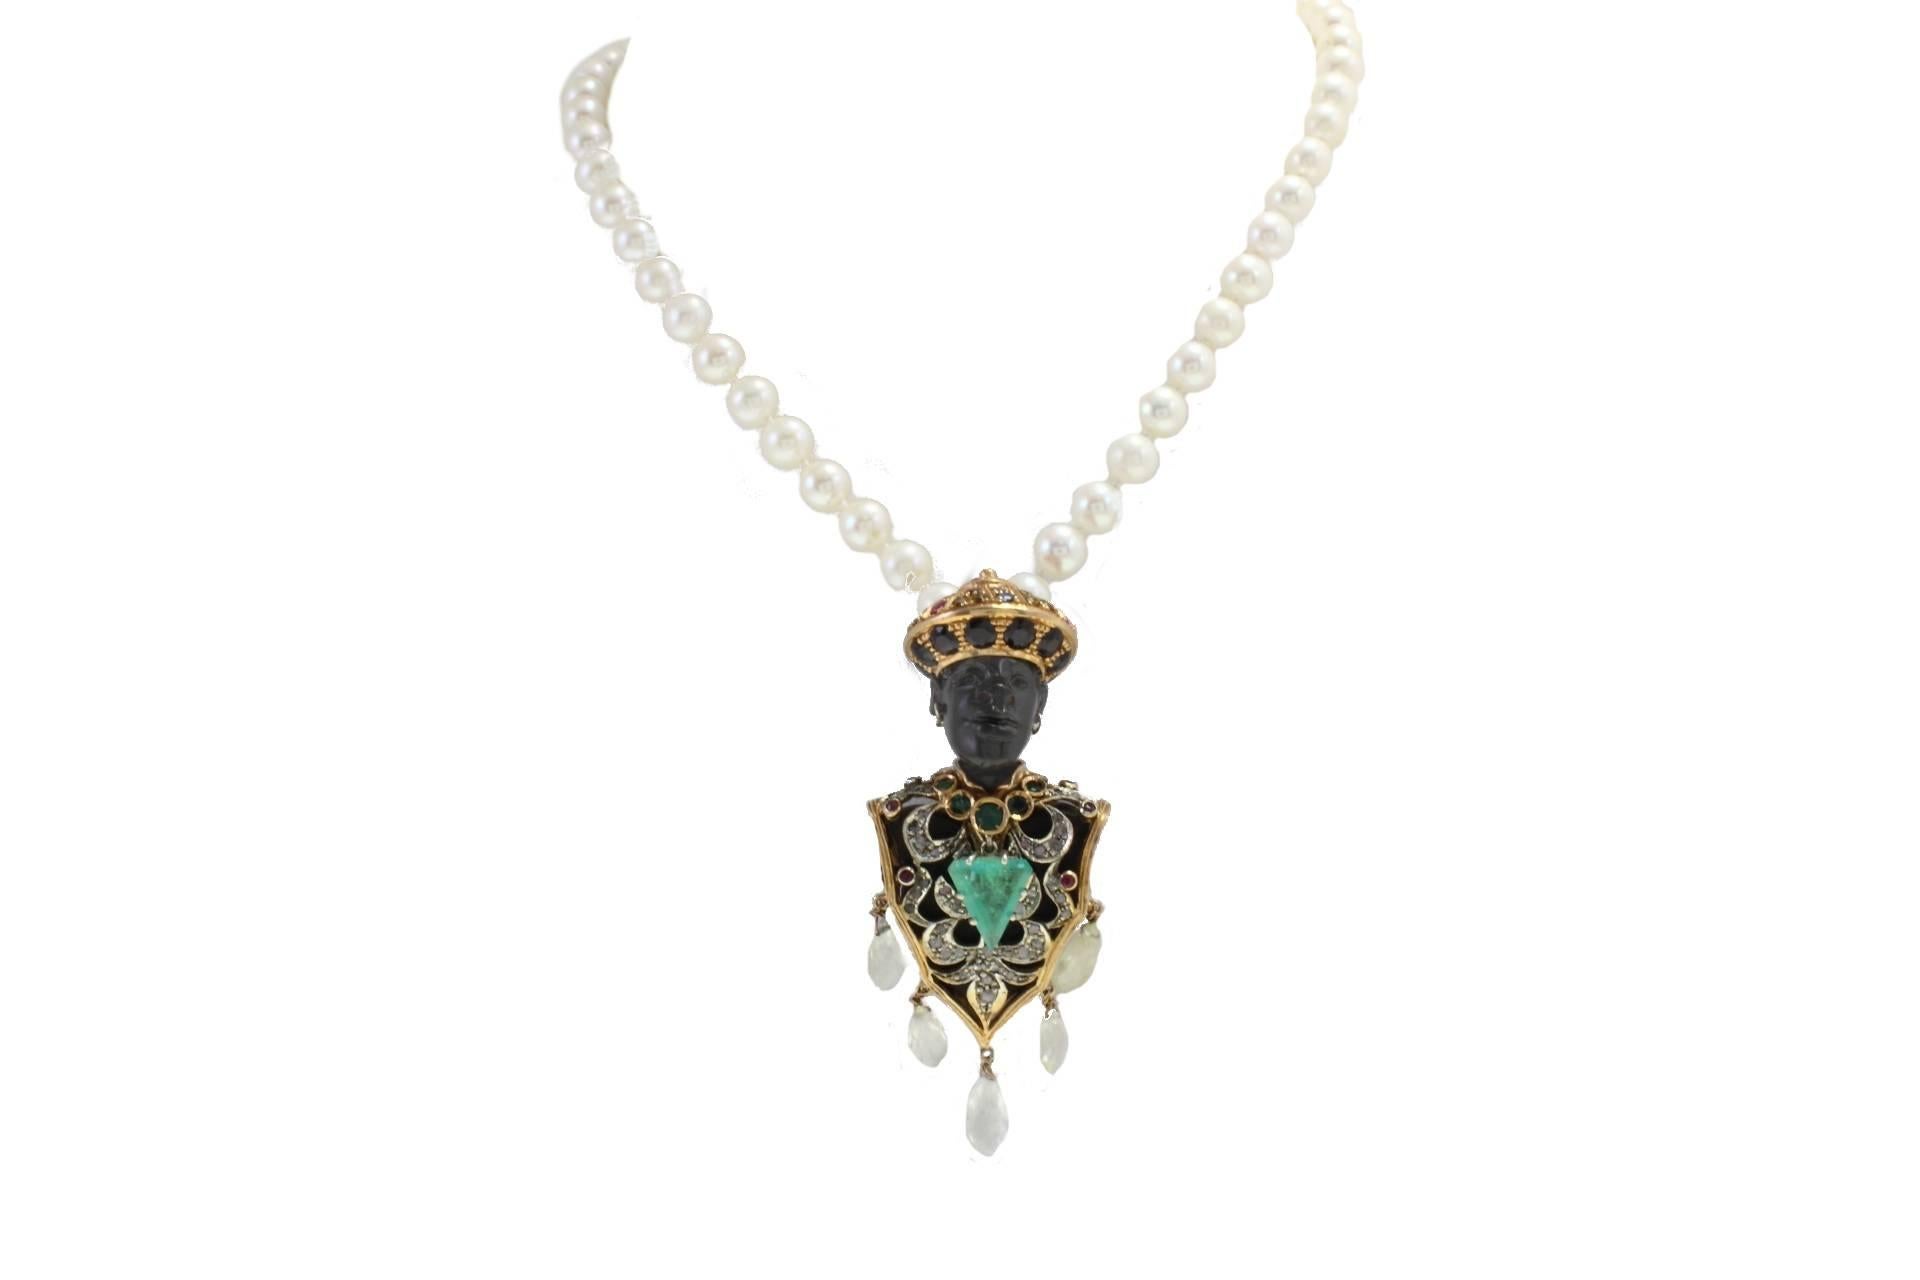 Beaded necklace linked with a Moretti Pendant in 9kt gold and silver made with ebony and embellished with diamonds, rubies, sapphires, emeralds and stones.

diamonds 0.63kt
pearls 7 mm/0.27 inch
tot weight 45.8gr
r.f.  uiih